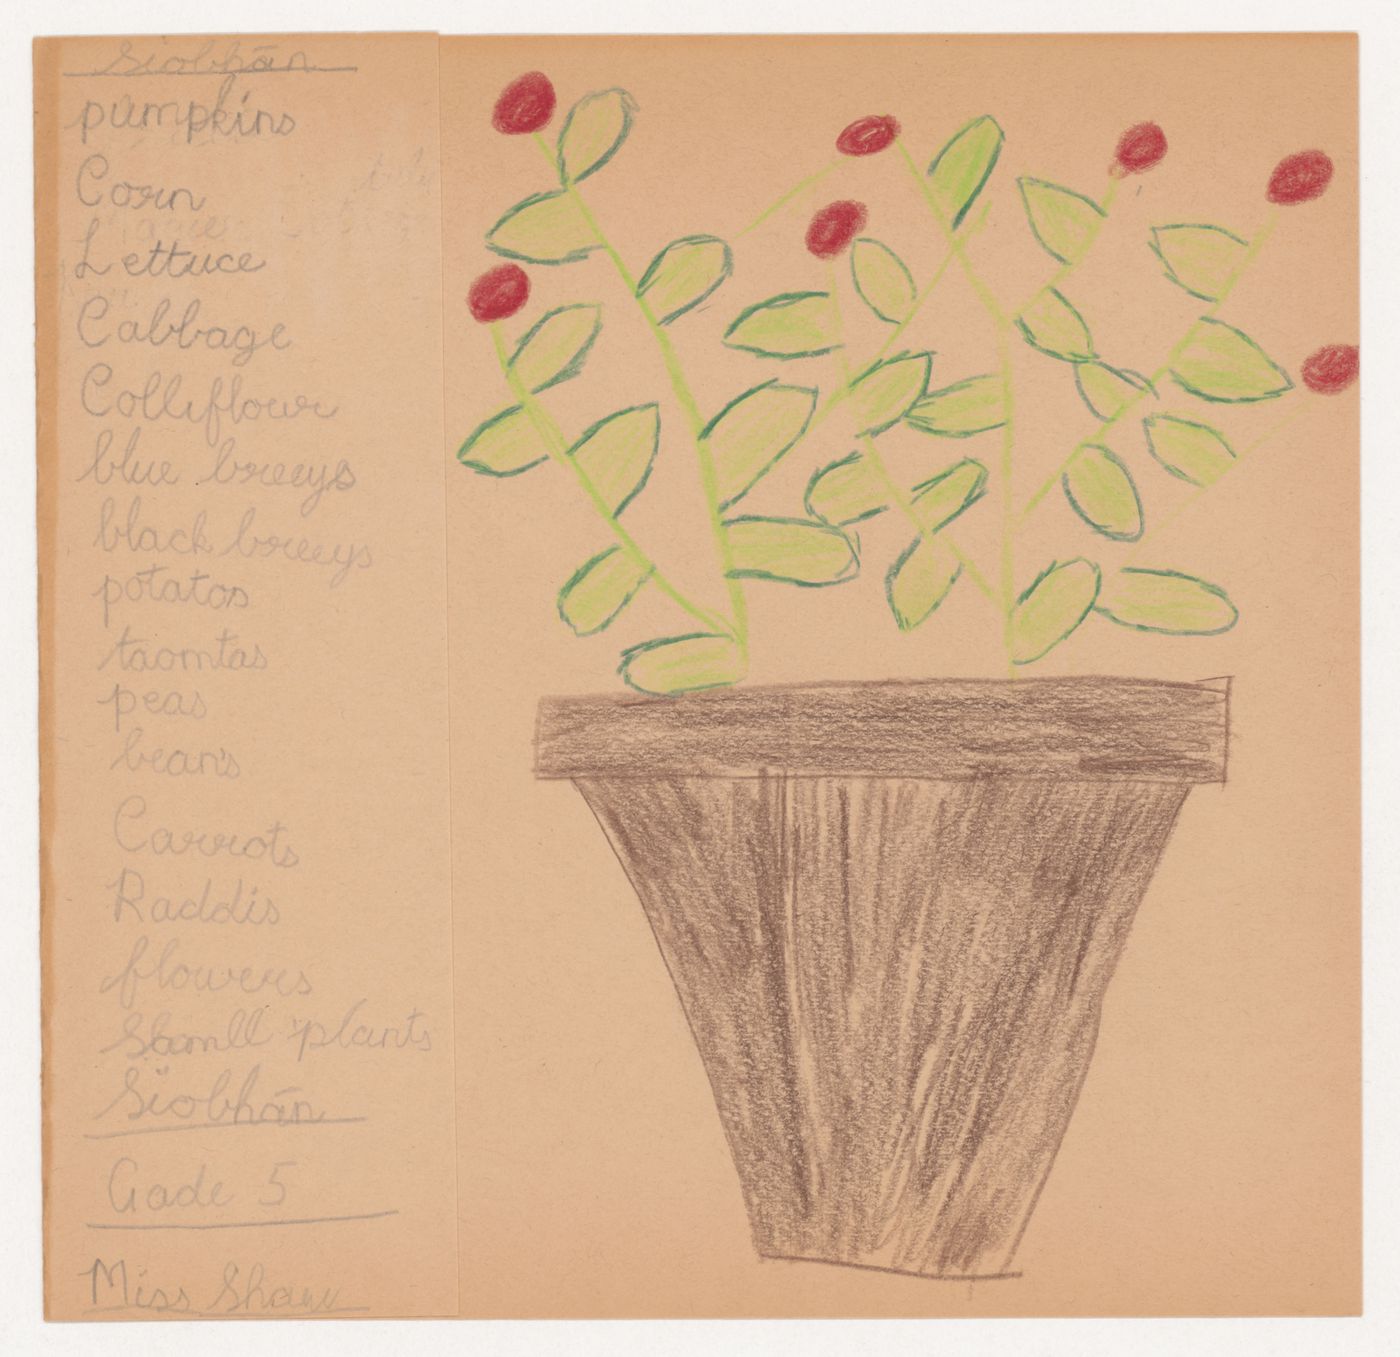 Child's drawing and list of fruits and vegetables for the ideal garden